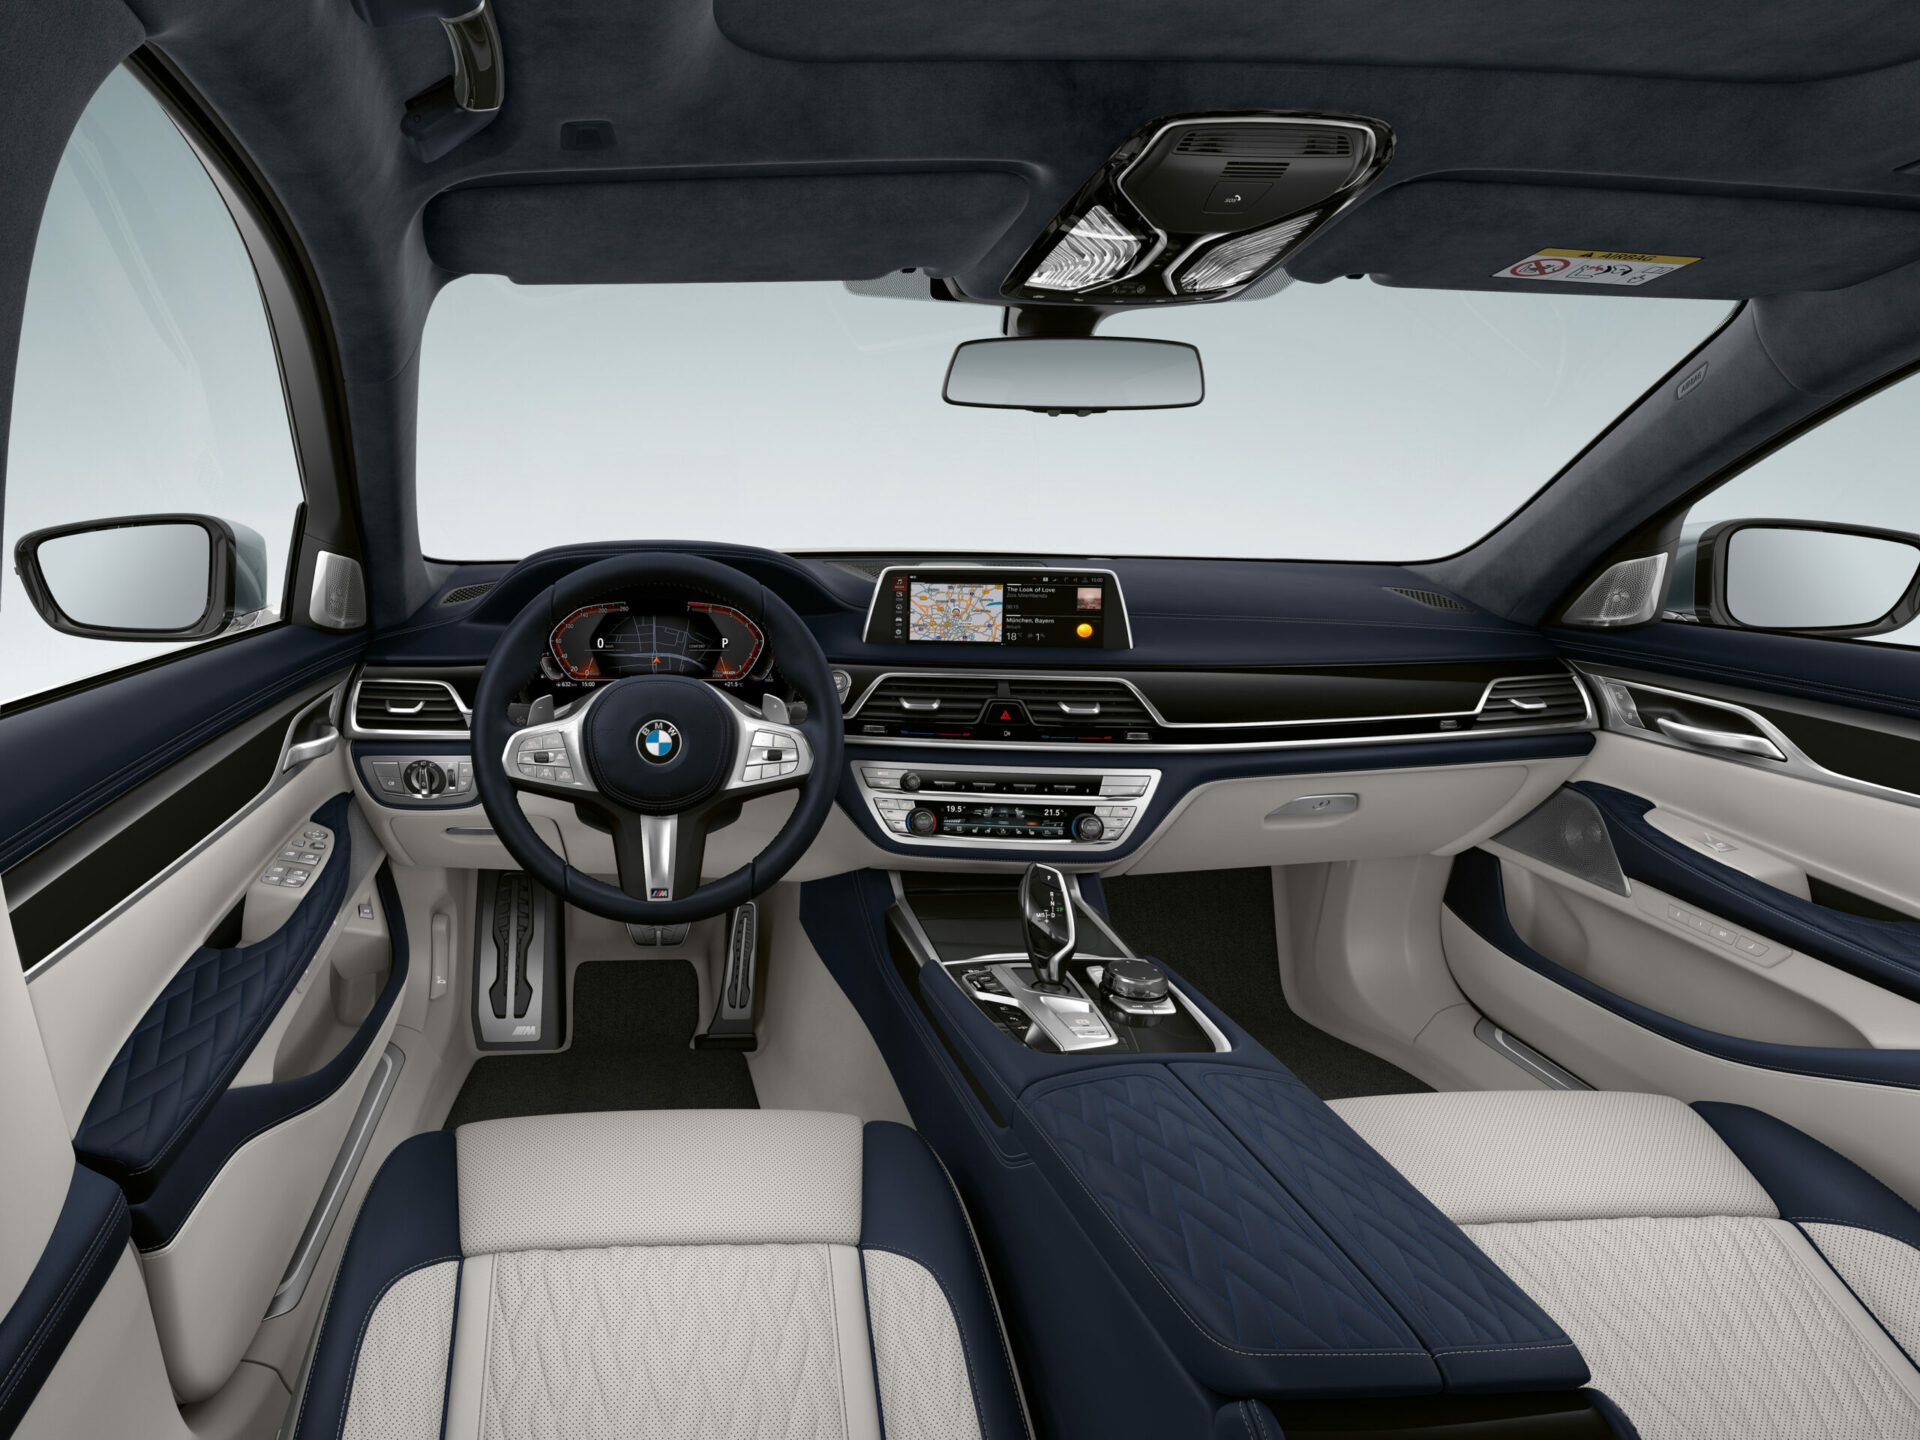 2016 BMW 7 Series: Cabin Technology and Luxury